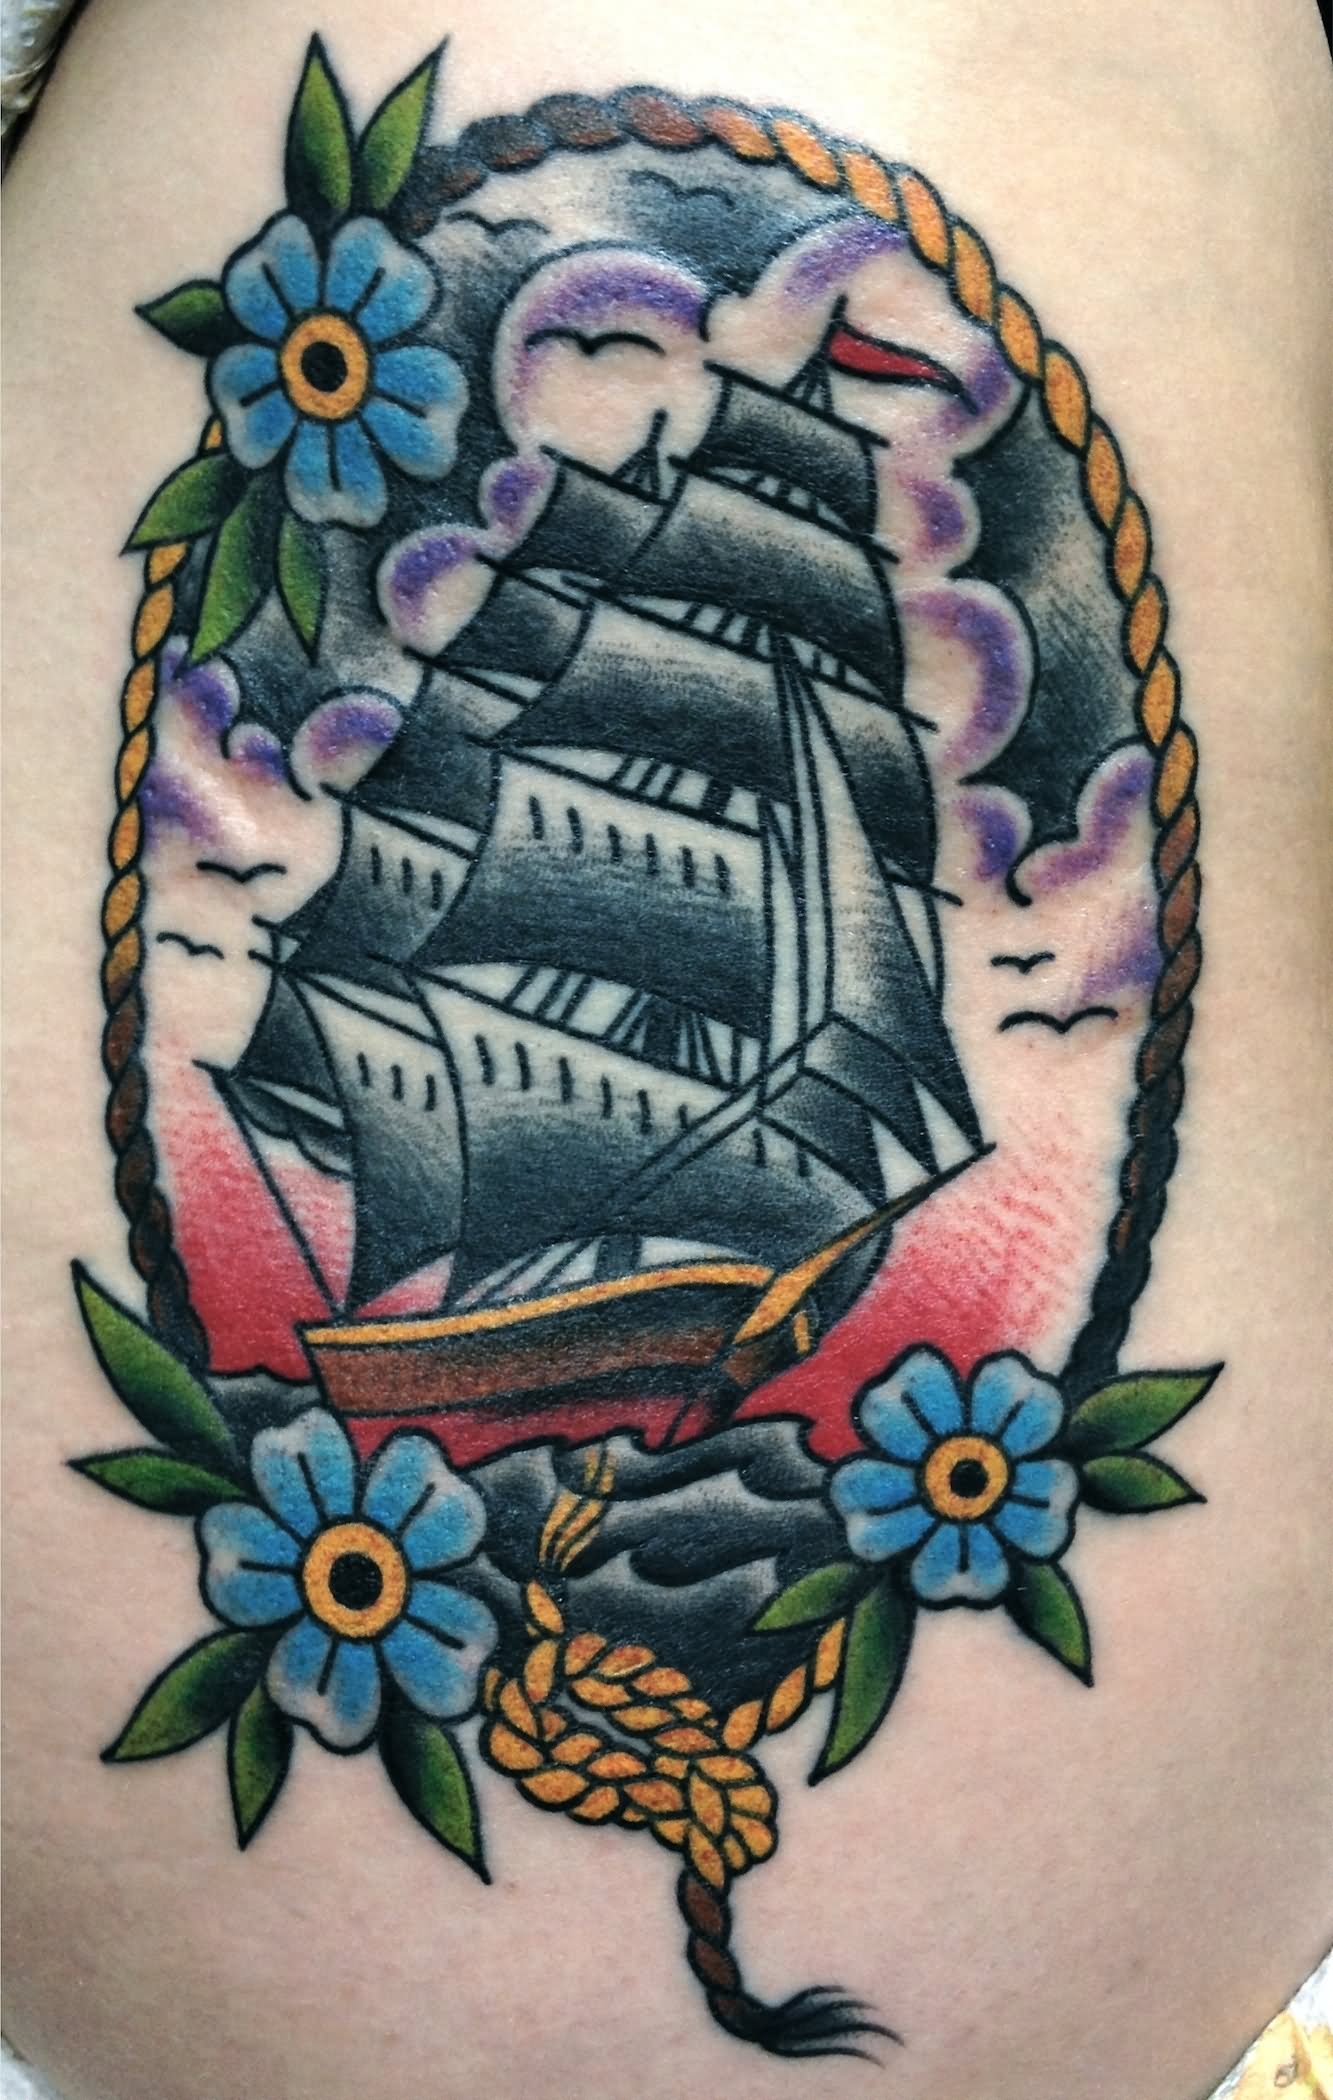 Sailor Ship In Rope Frame With Flowers Tattoo Design